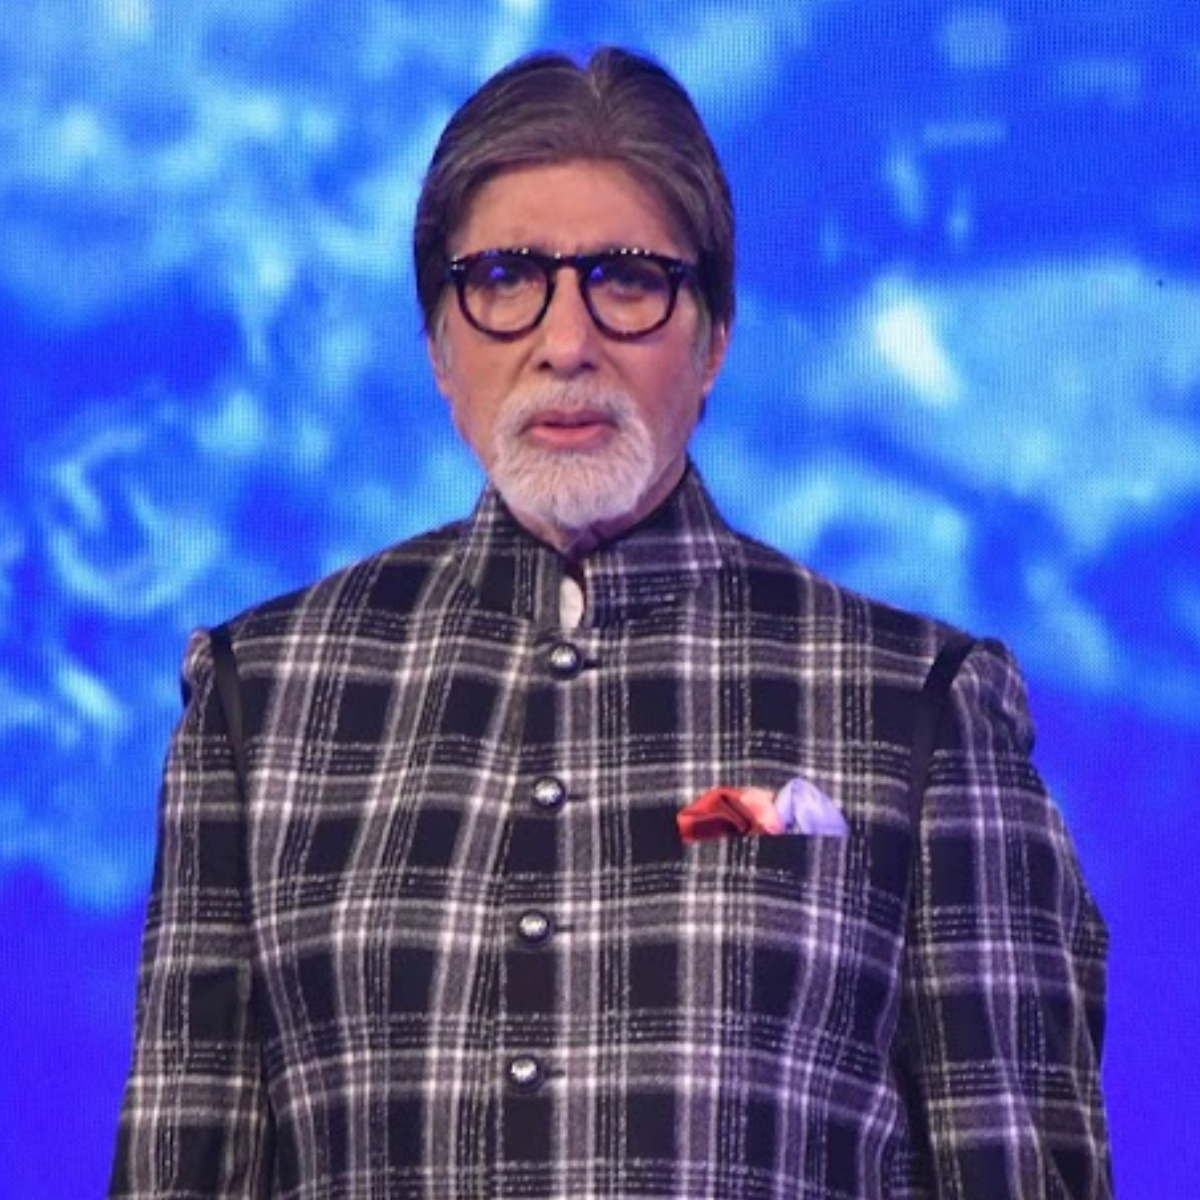 EXCLUSIVE: Amitabh Bachchan to play a commentator in R Balki’s Ghoomer featuring Abhishek Bachchan